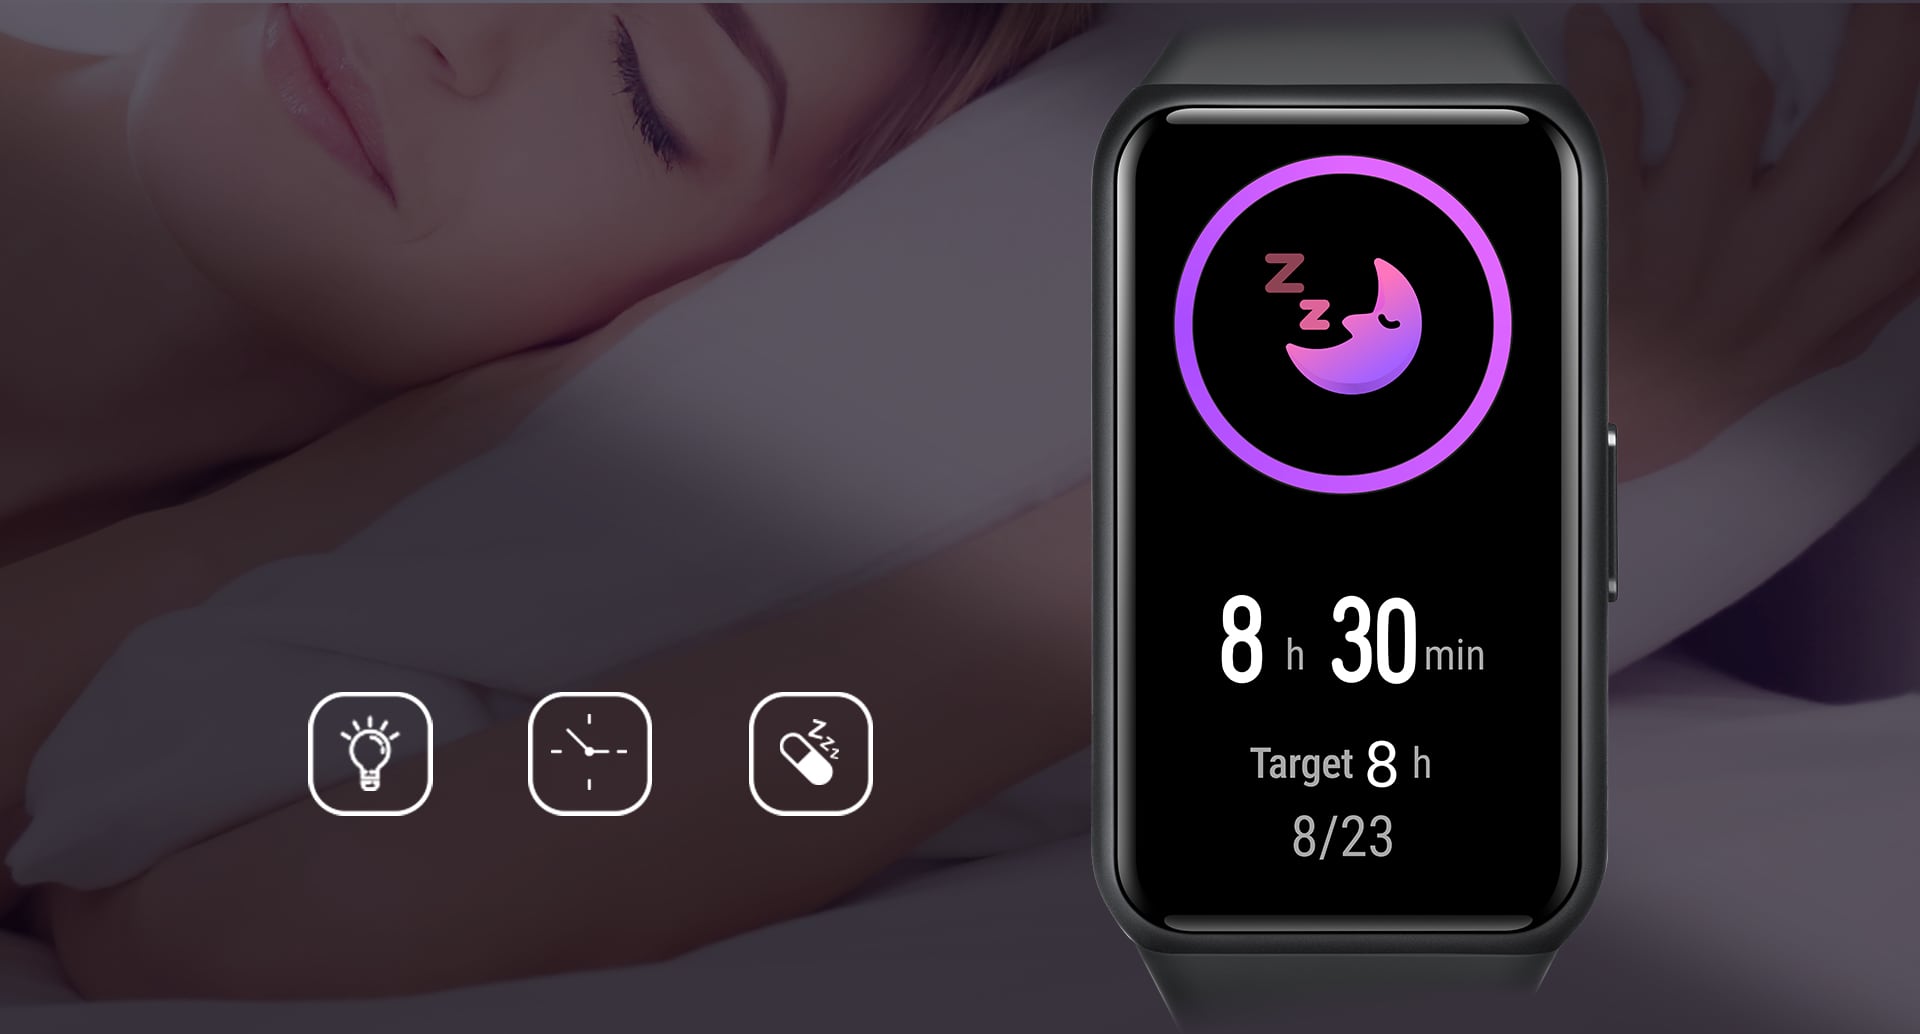 HONOR Band 6 supports Sleep Monitoring, helping improve the quality of your sleep